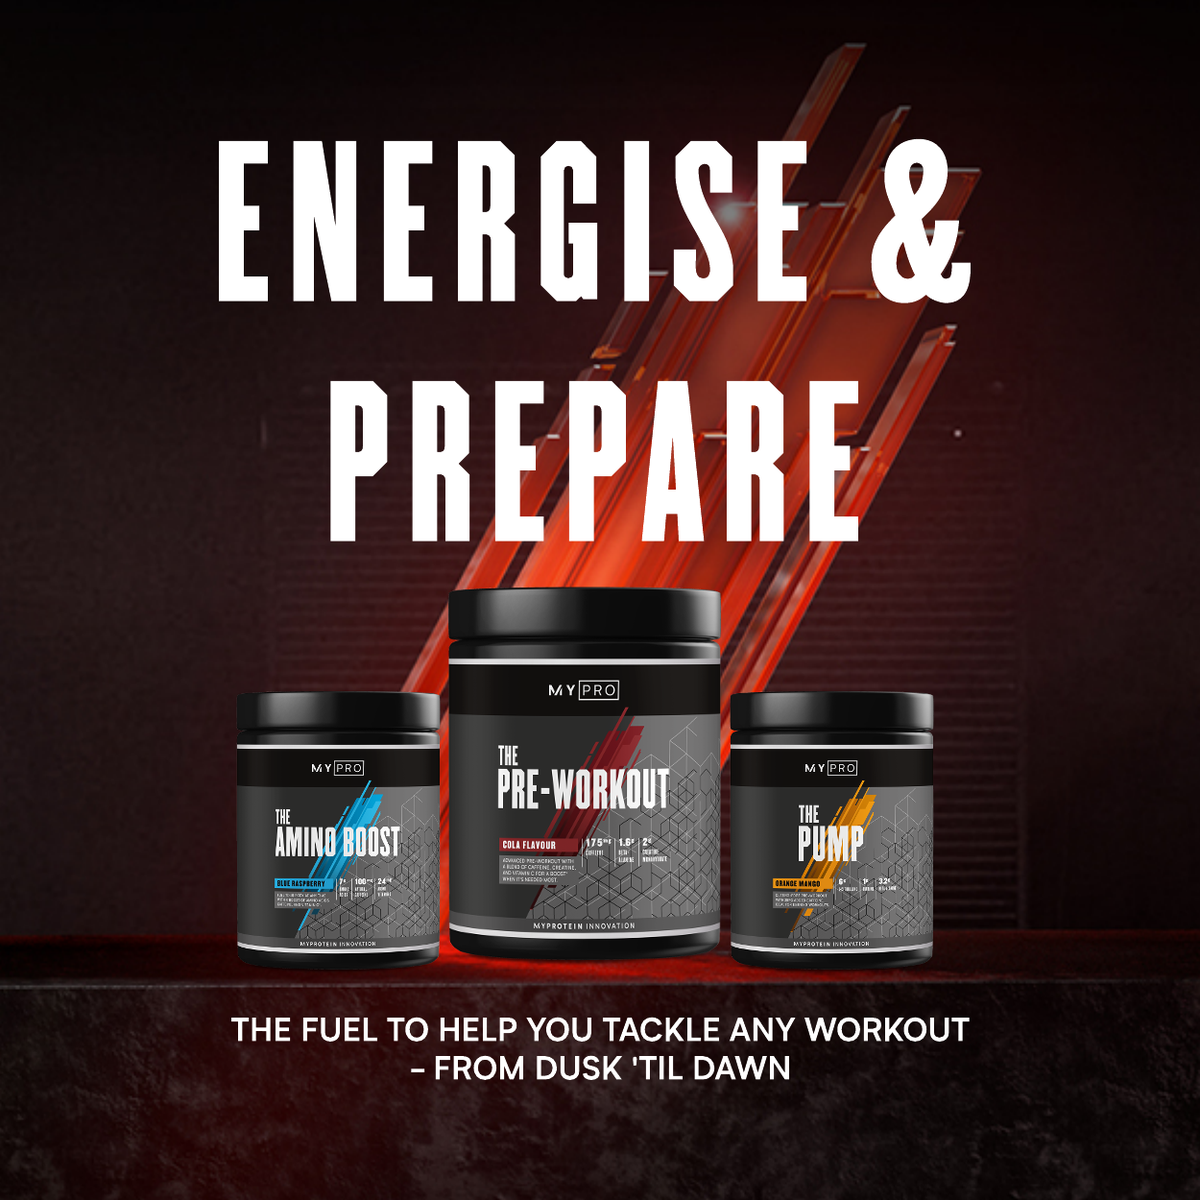 Energise & prepare. The fuel to help you tackle any workout - from dusk til dawn